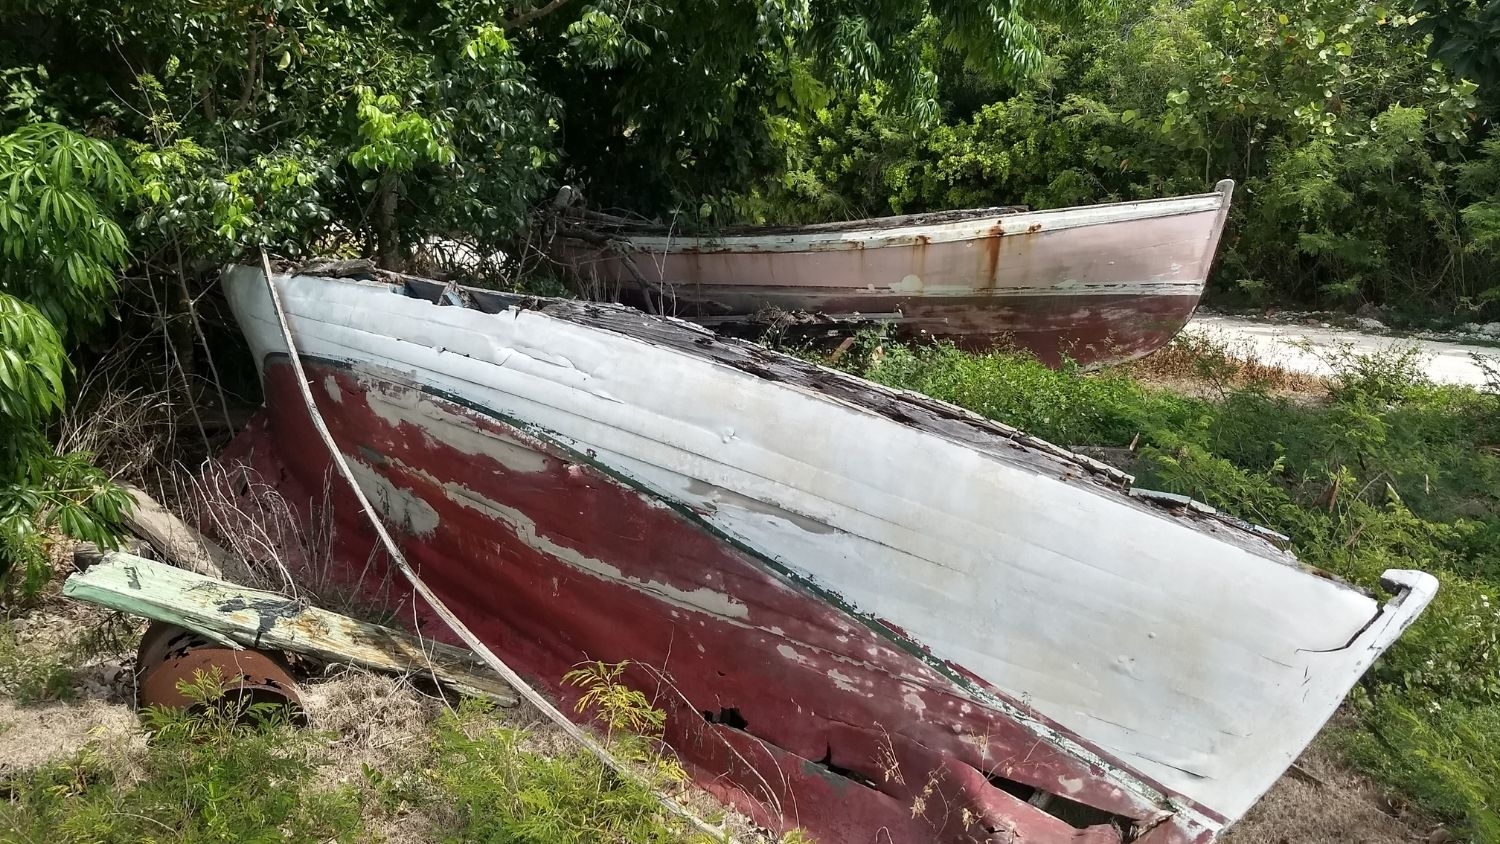 Wooden boats on Andros, the largest island in the Bahamas - Bahamian Communities Face Natural Resource Challenges Amid Modernization - College of Natural Resources News NC State University